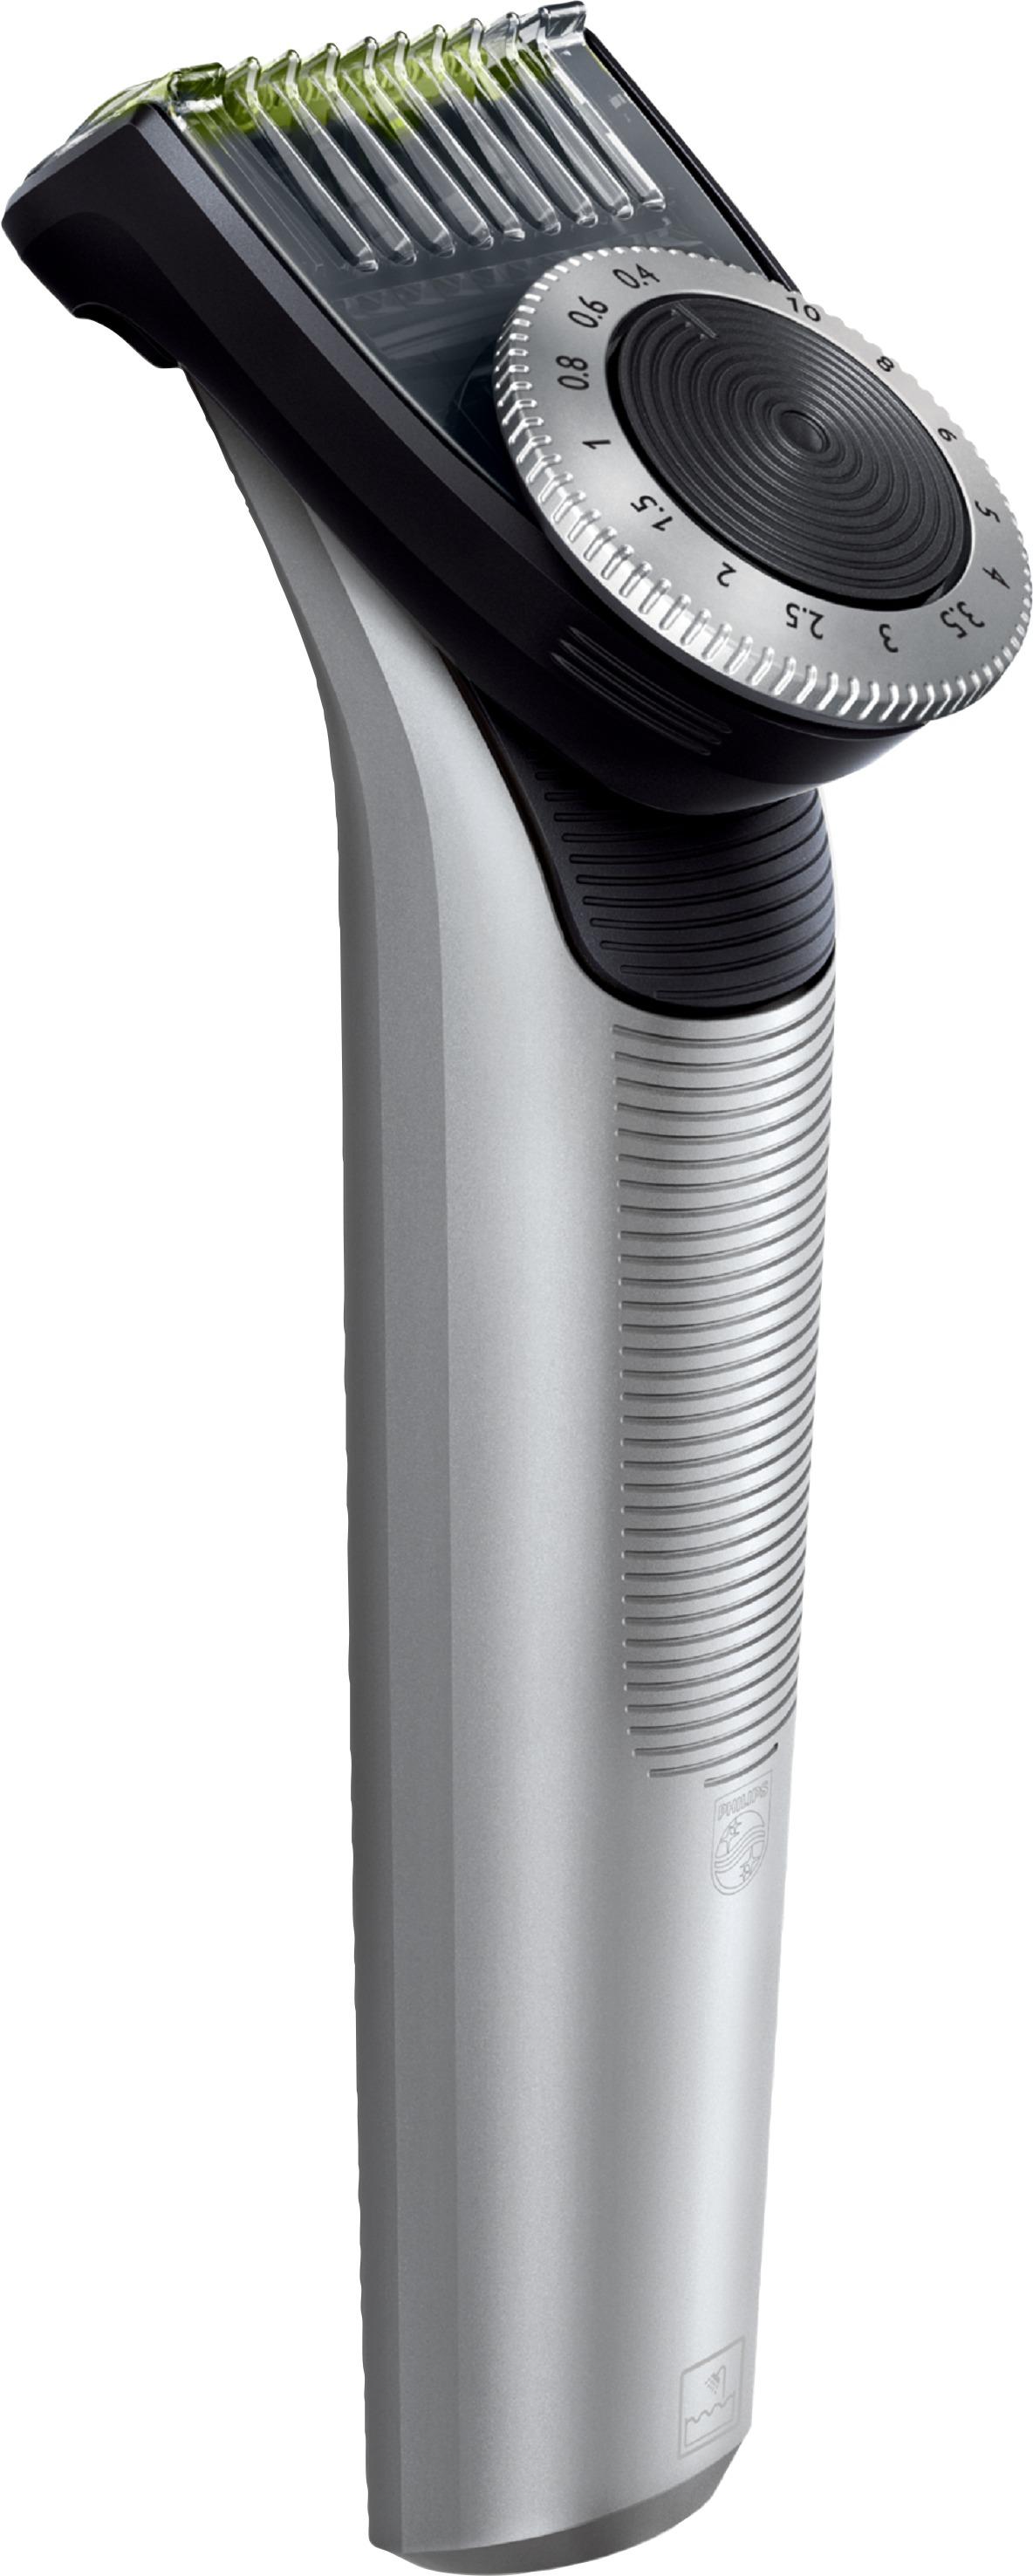 Philips Norelco - OneBlade Pro Wet/Dry Trimmer - Black/Green